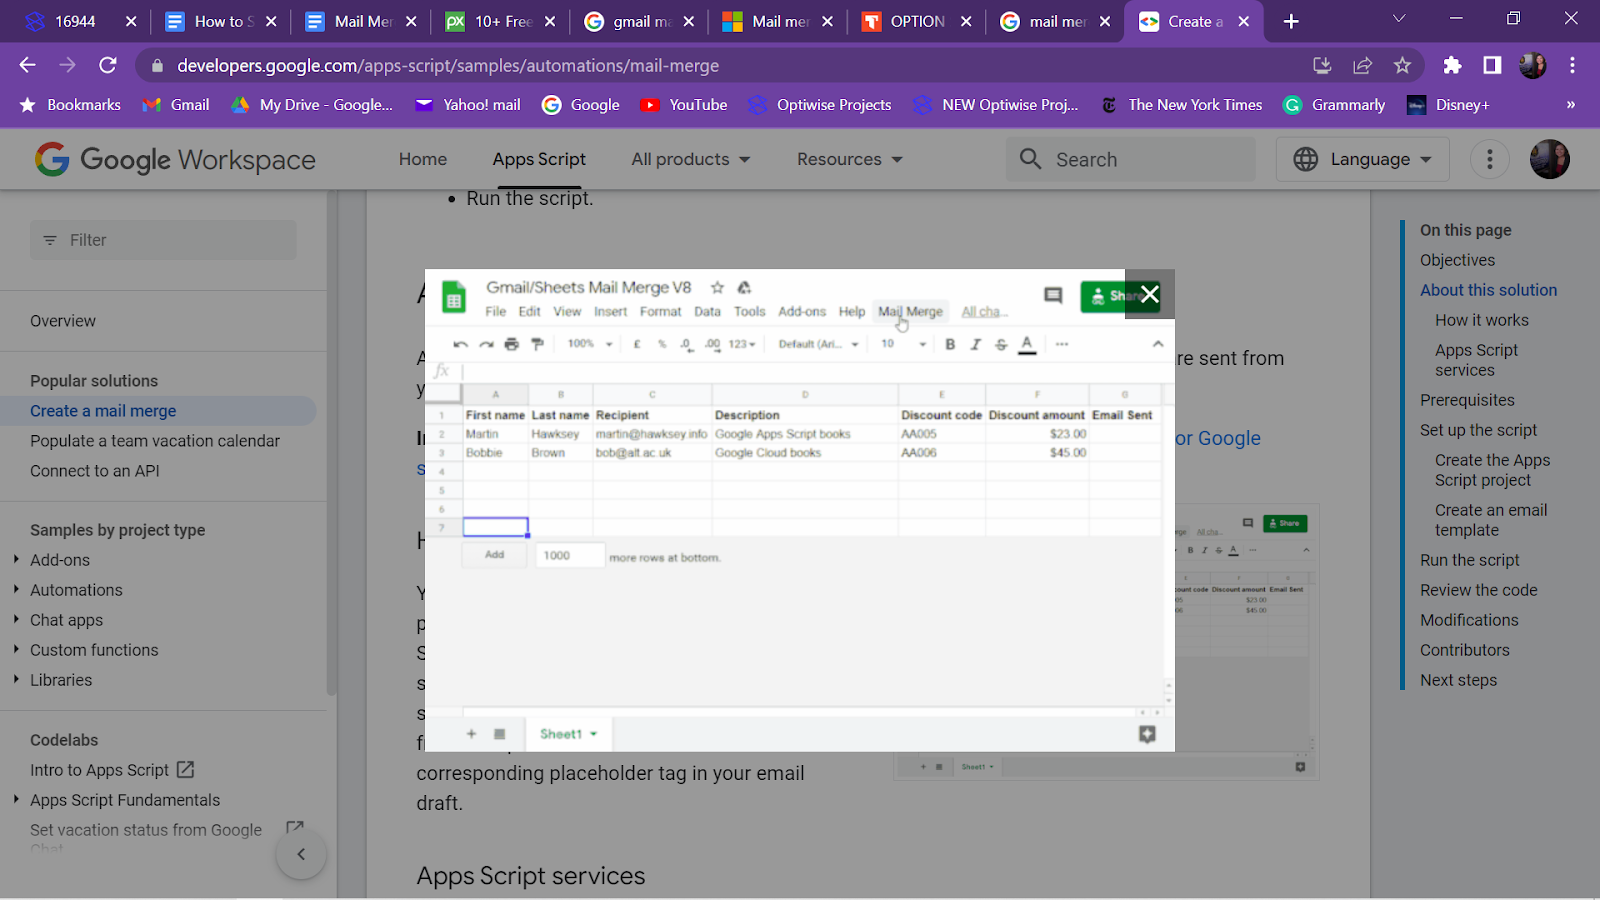 Creating a mailing list on a Google spreadsheet